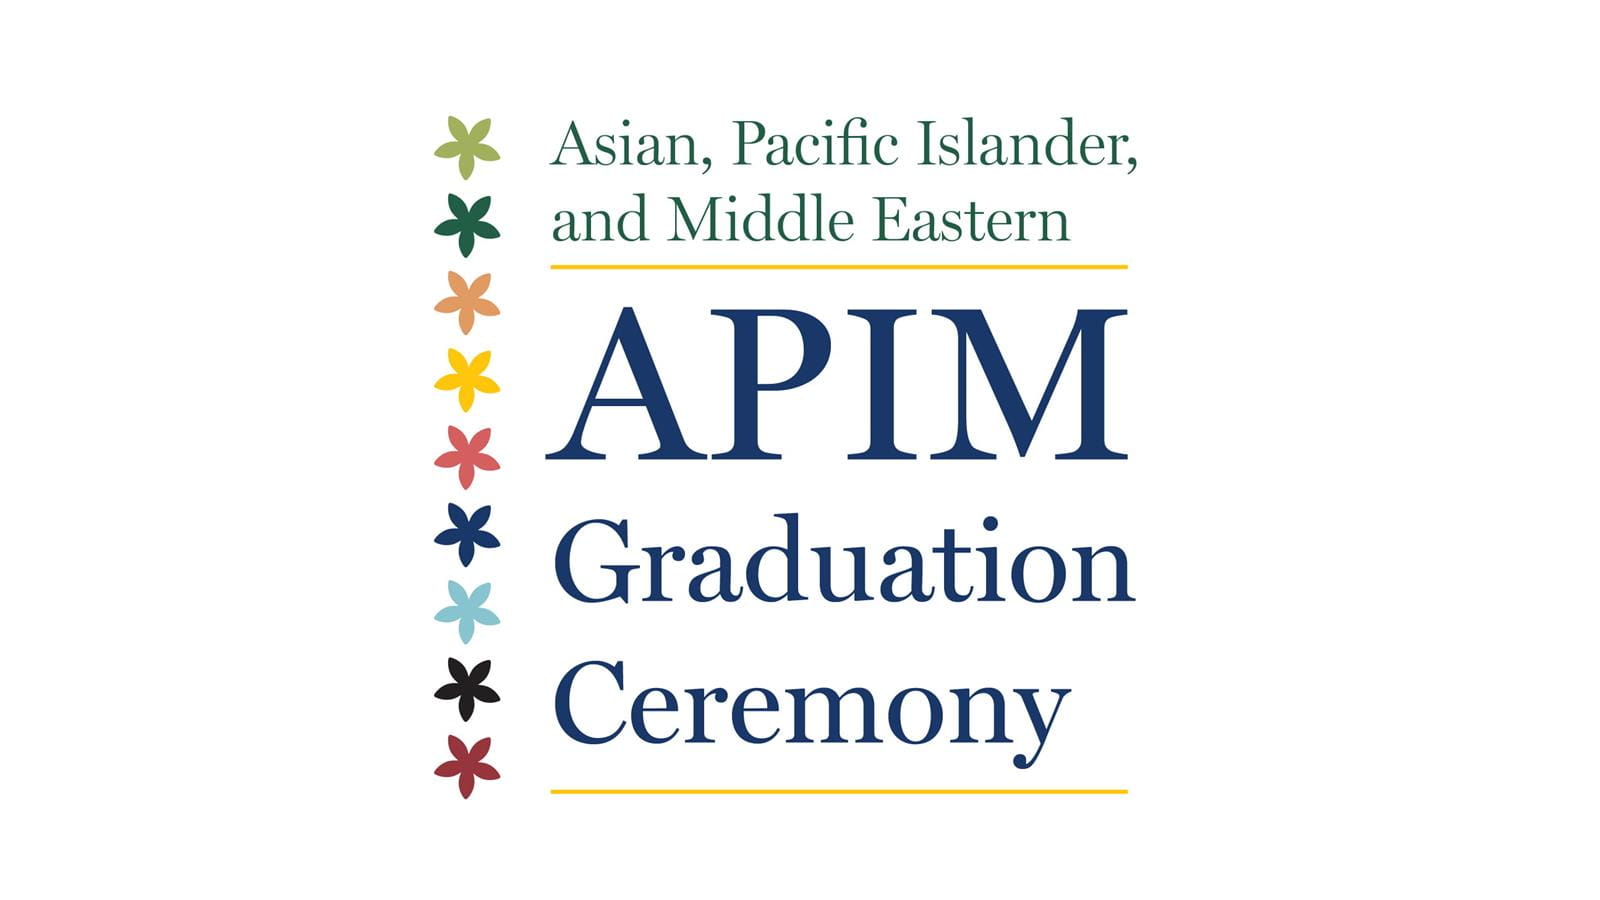 Asian, Pacific Islander, and Middle Eastern (APIM) Graduation Ceremony